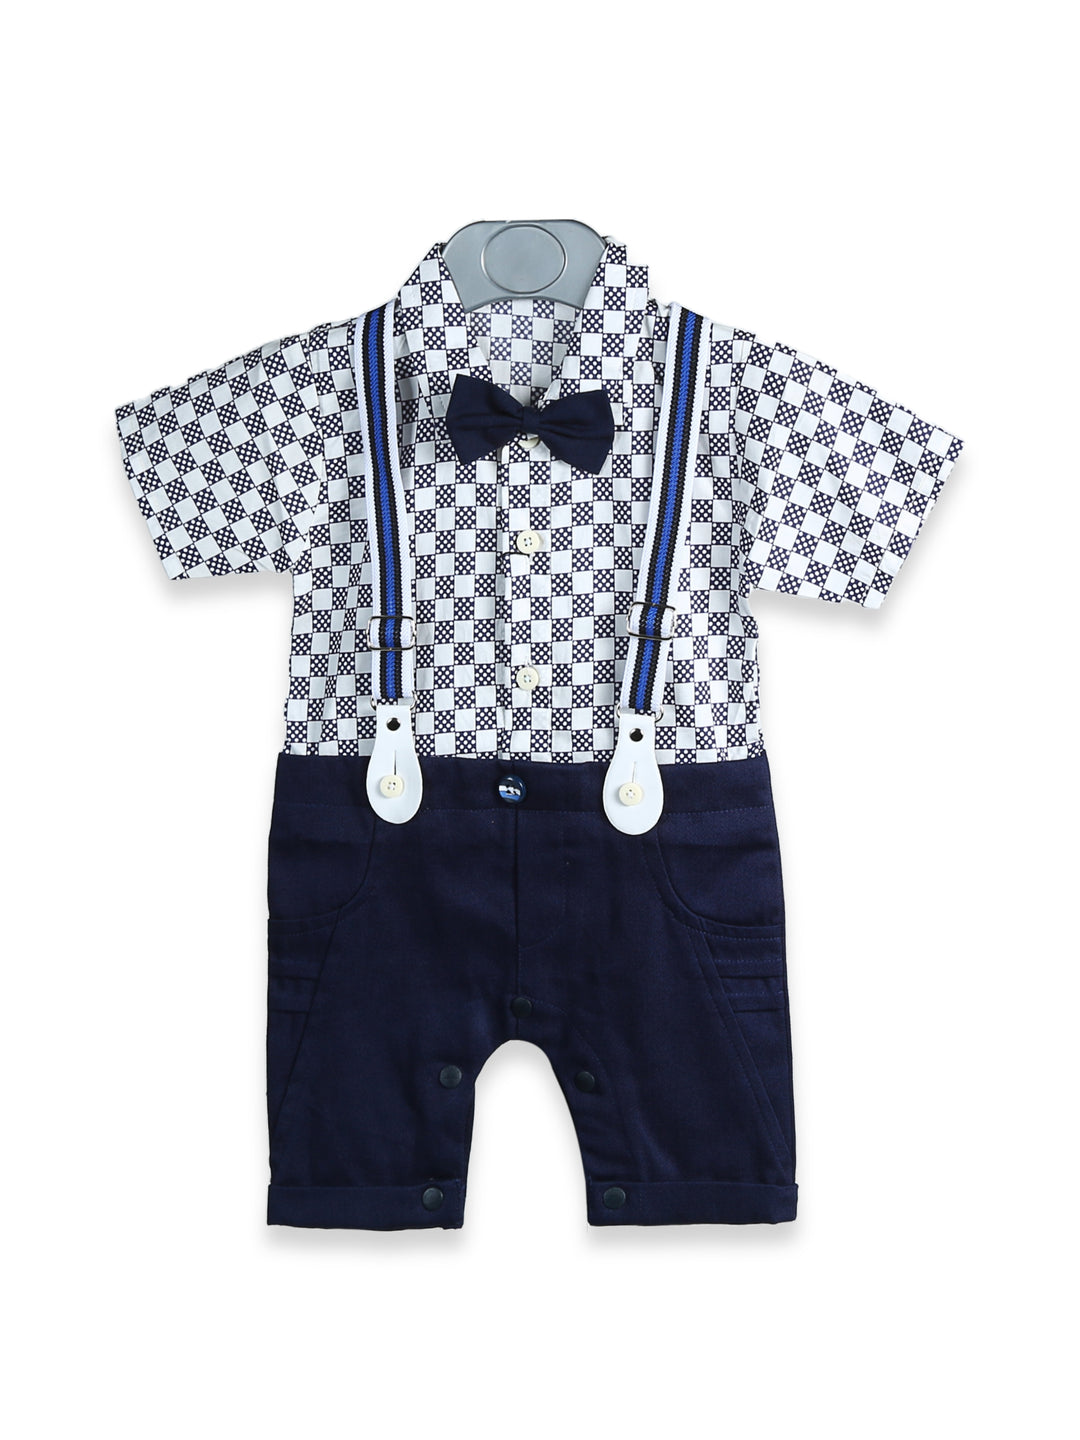 Bingobhoom Boys H/S Romper With Bow & Gallace #420 (W-22)